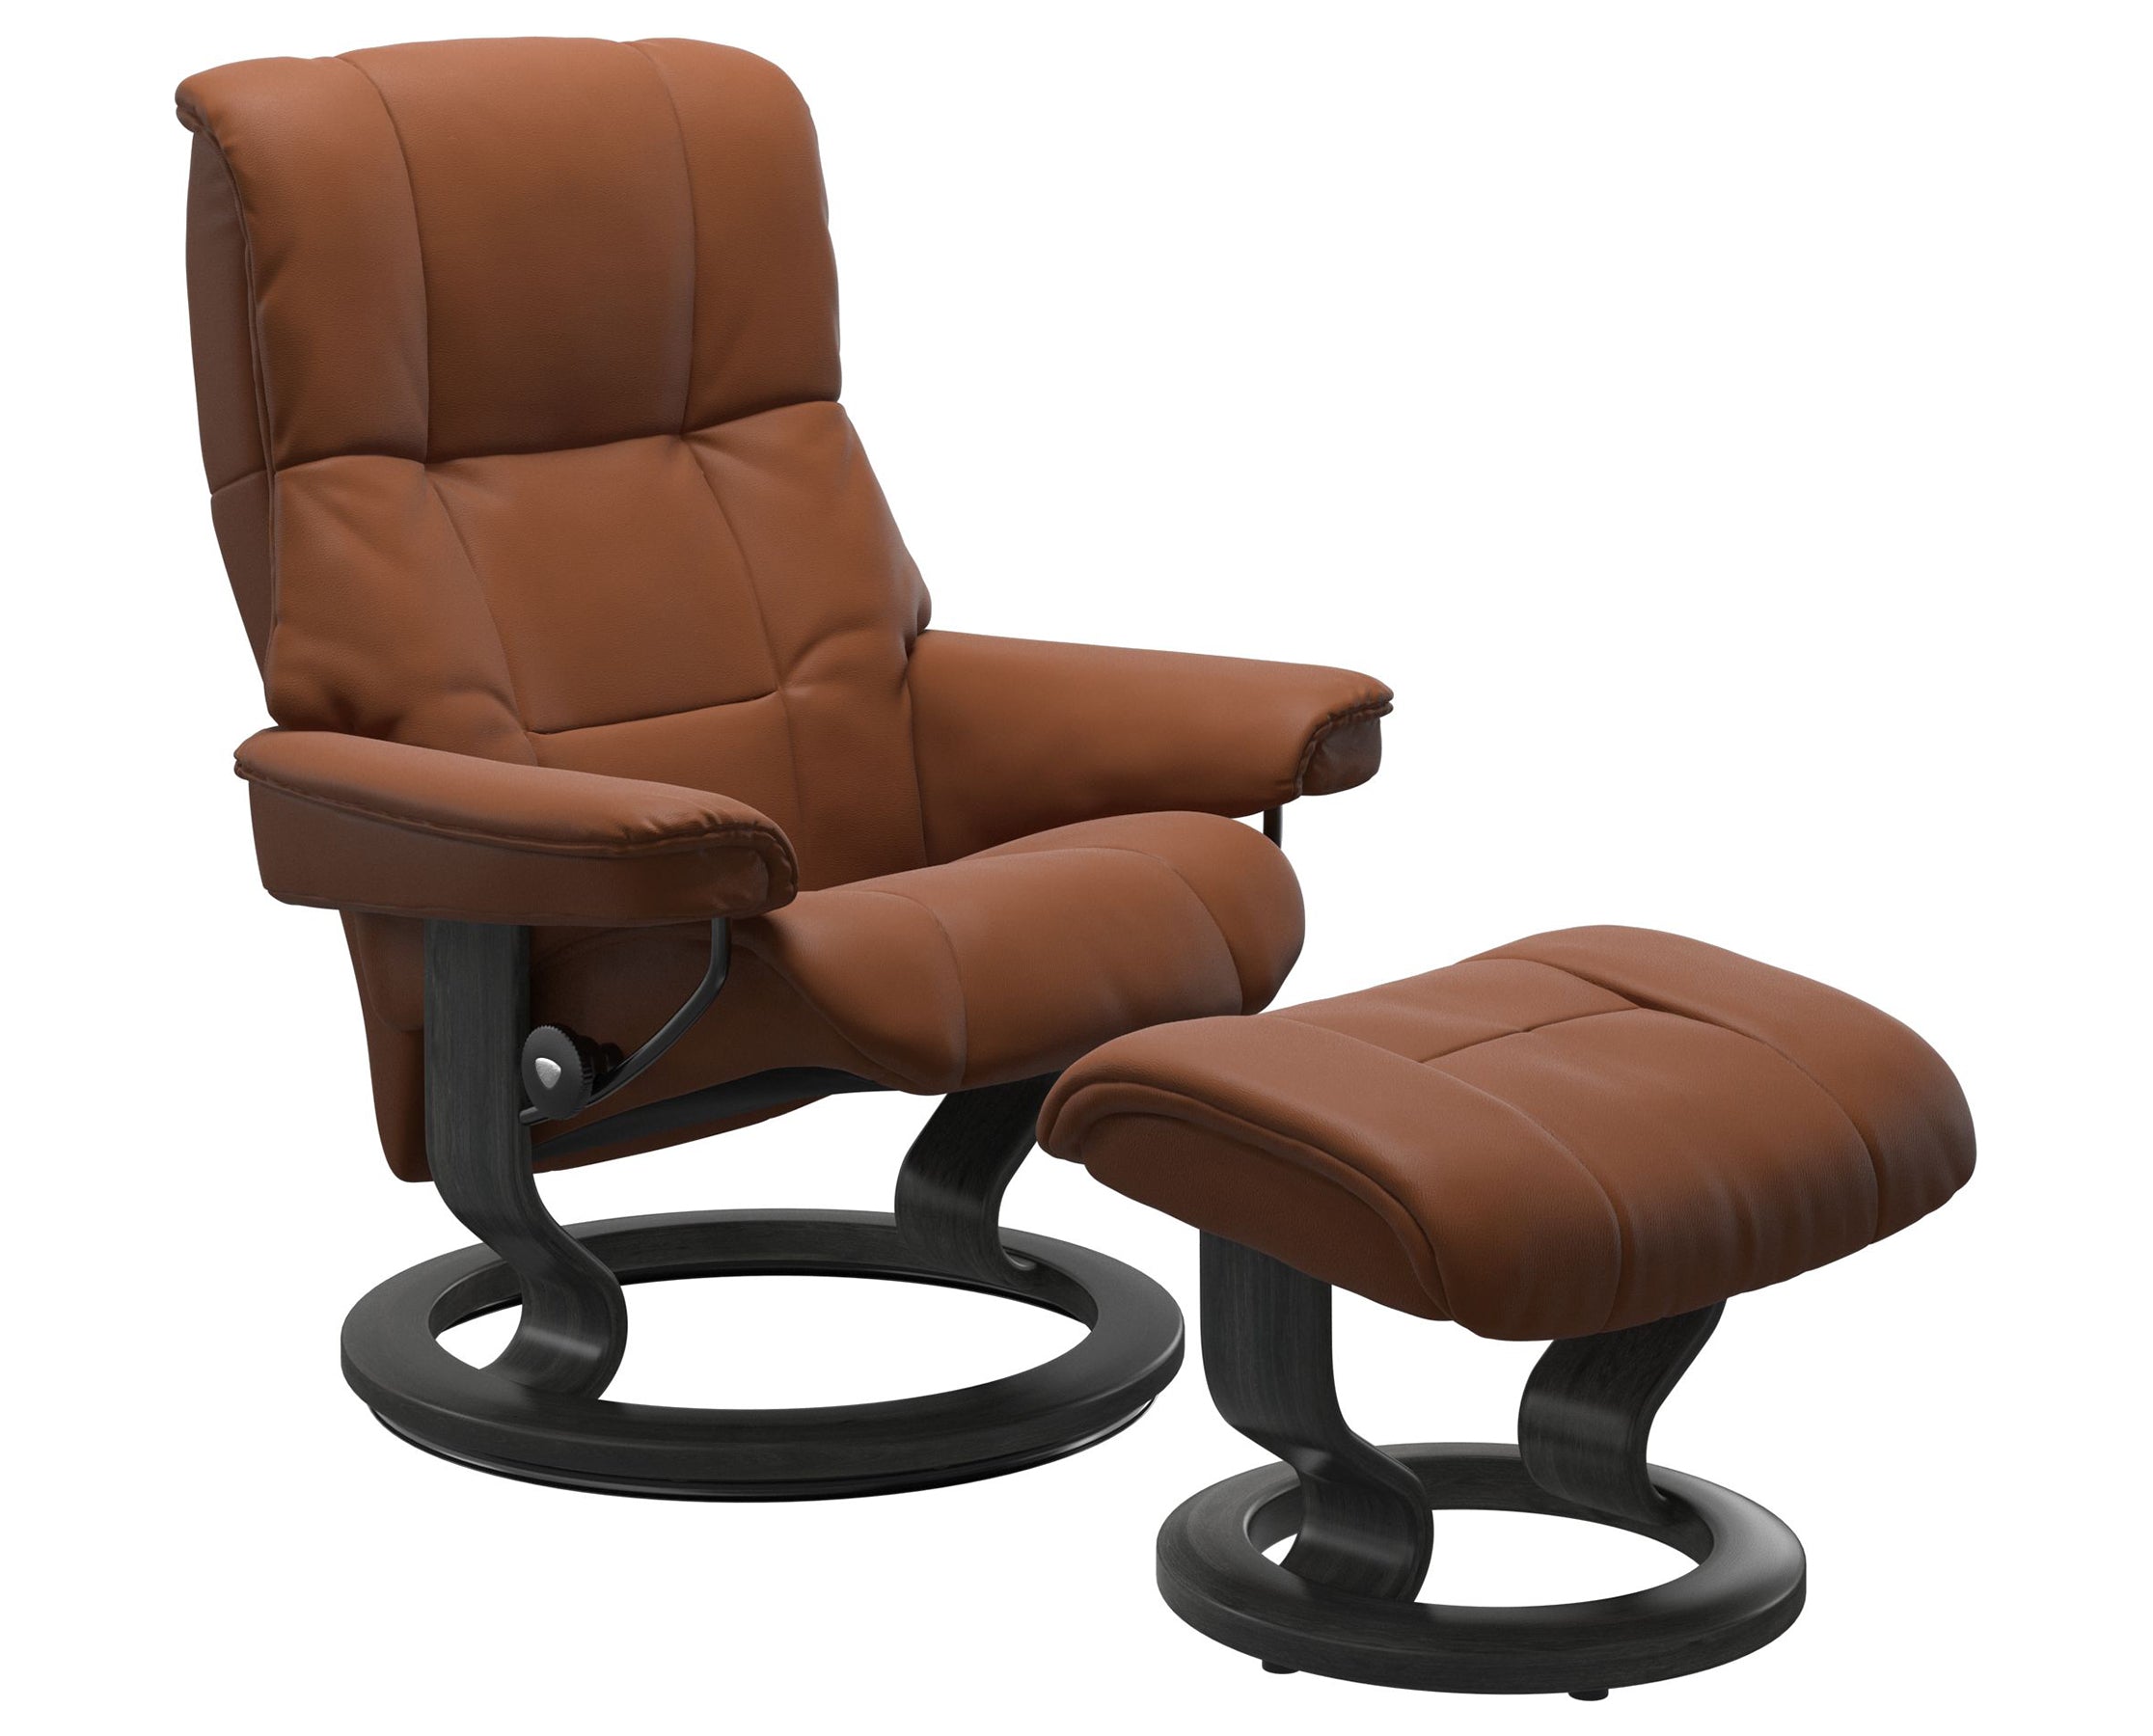 Paloma Leather New Cognac S/M/L and Grey Base | Stressless Mayfair Classic Recliner | Valley Ridge Furniture